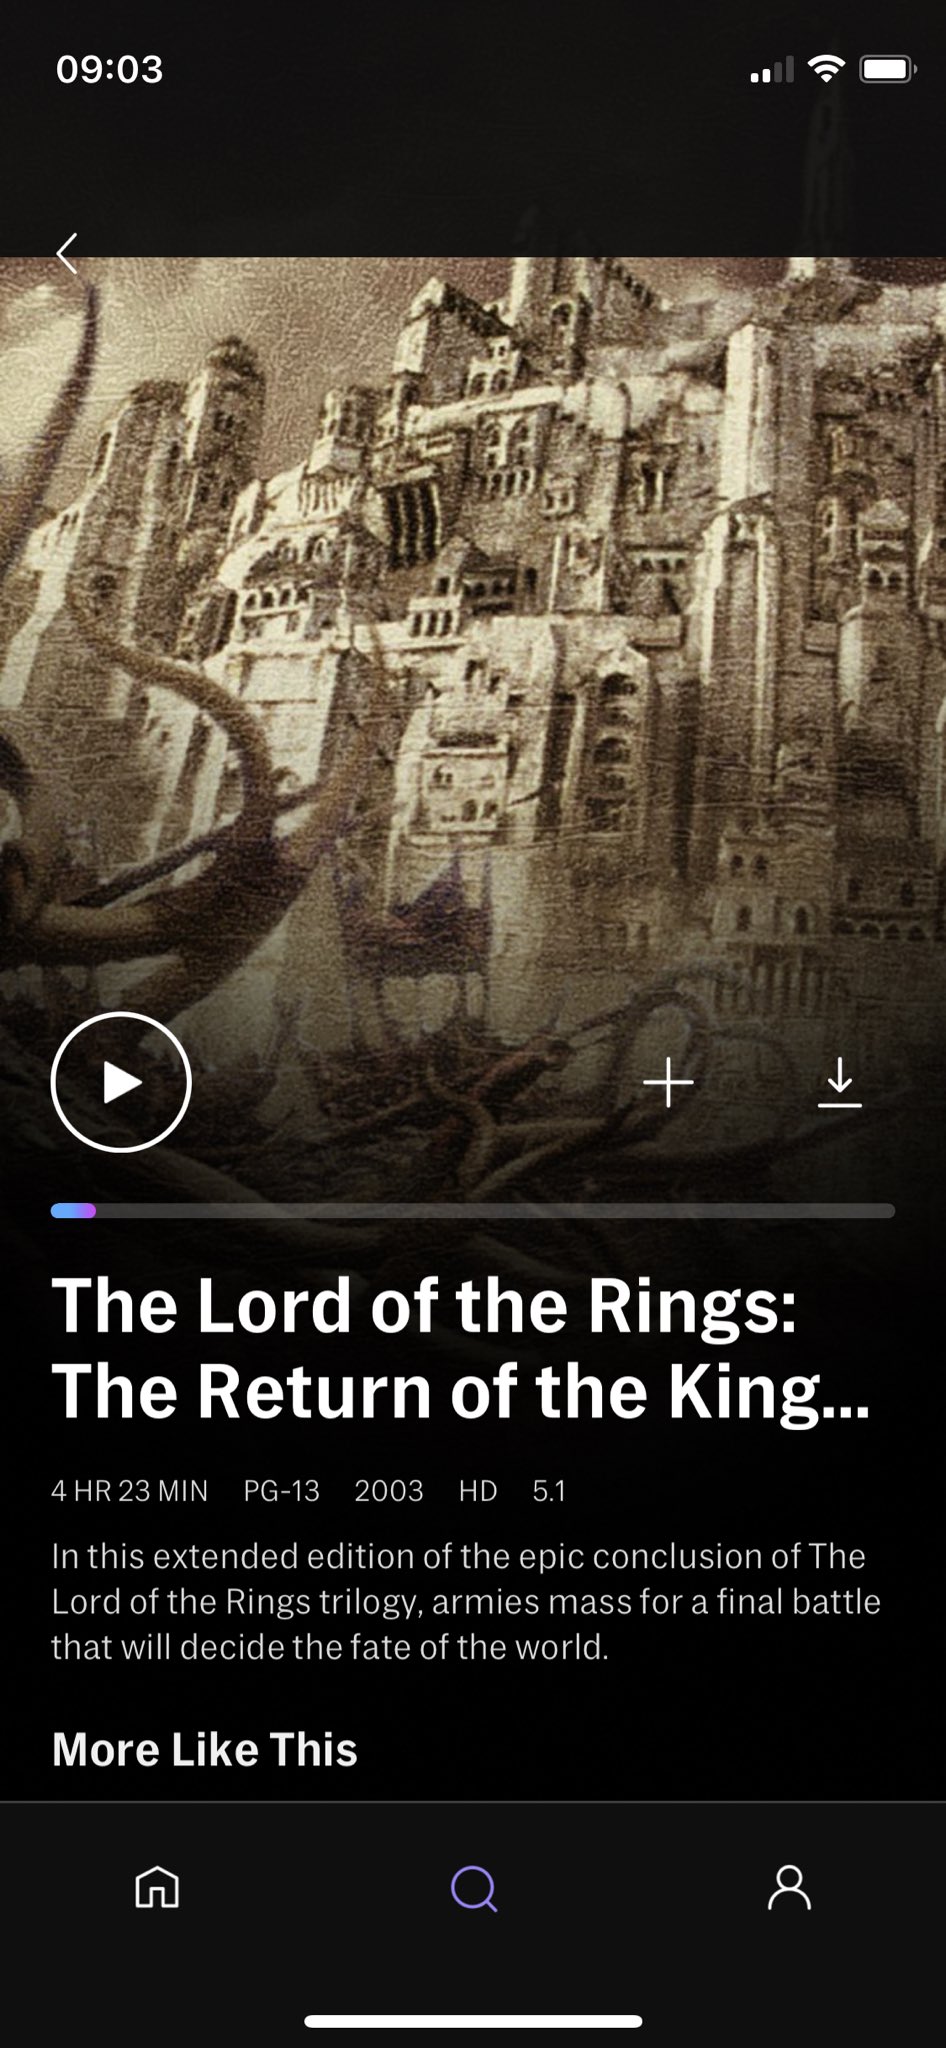 Senator sovjetisk Martyr TheOneRing on Twitter: "It's official, @HBOMax is the FIRST streaming  service ever to offer LOTR Extended Edition! RETURN OF THE KING is the new  remastered edition in 1080p. No word yet on